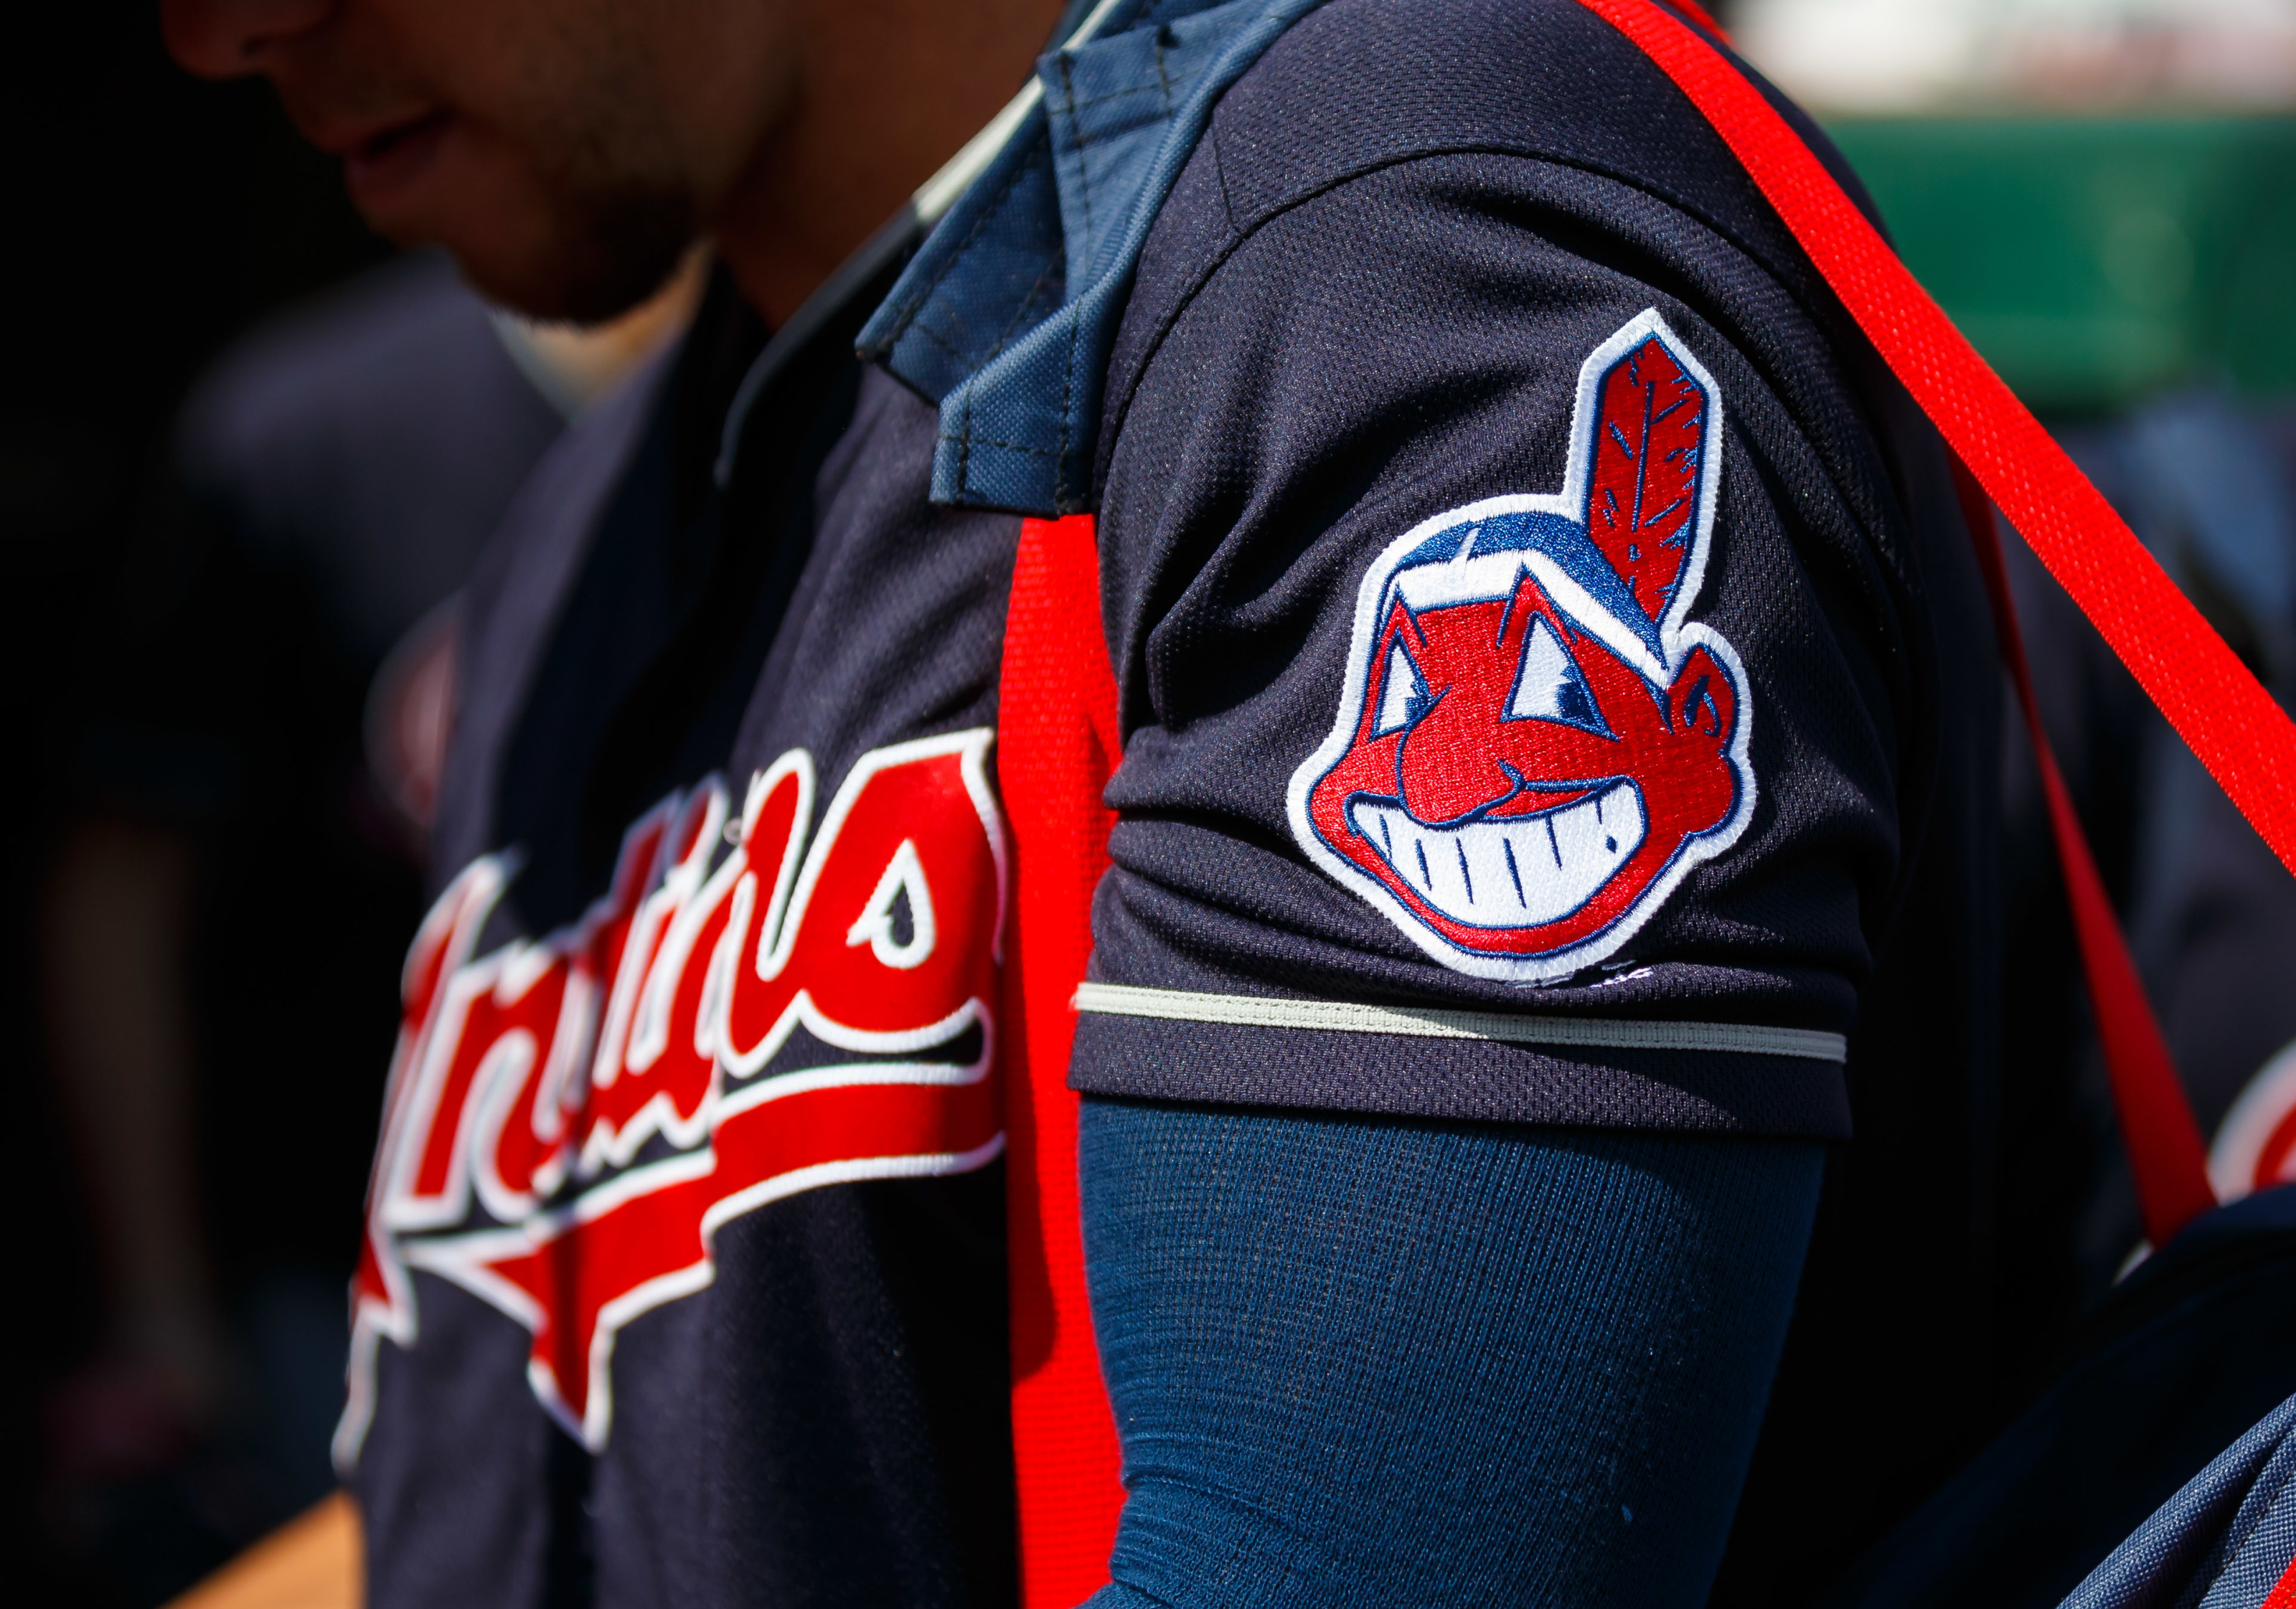 Cleveland Indians unveil their first new uniforms without Chief